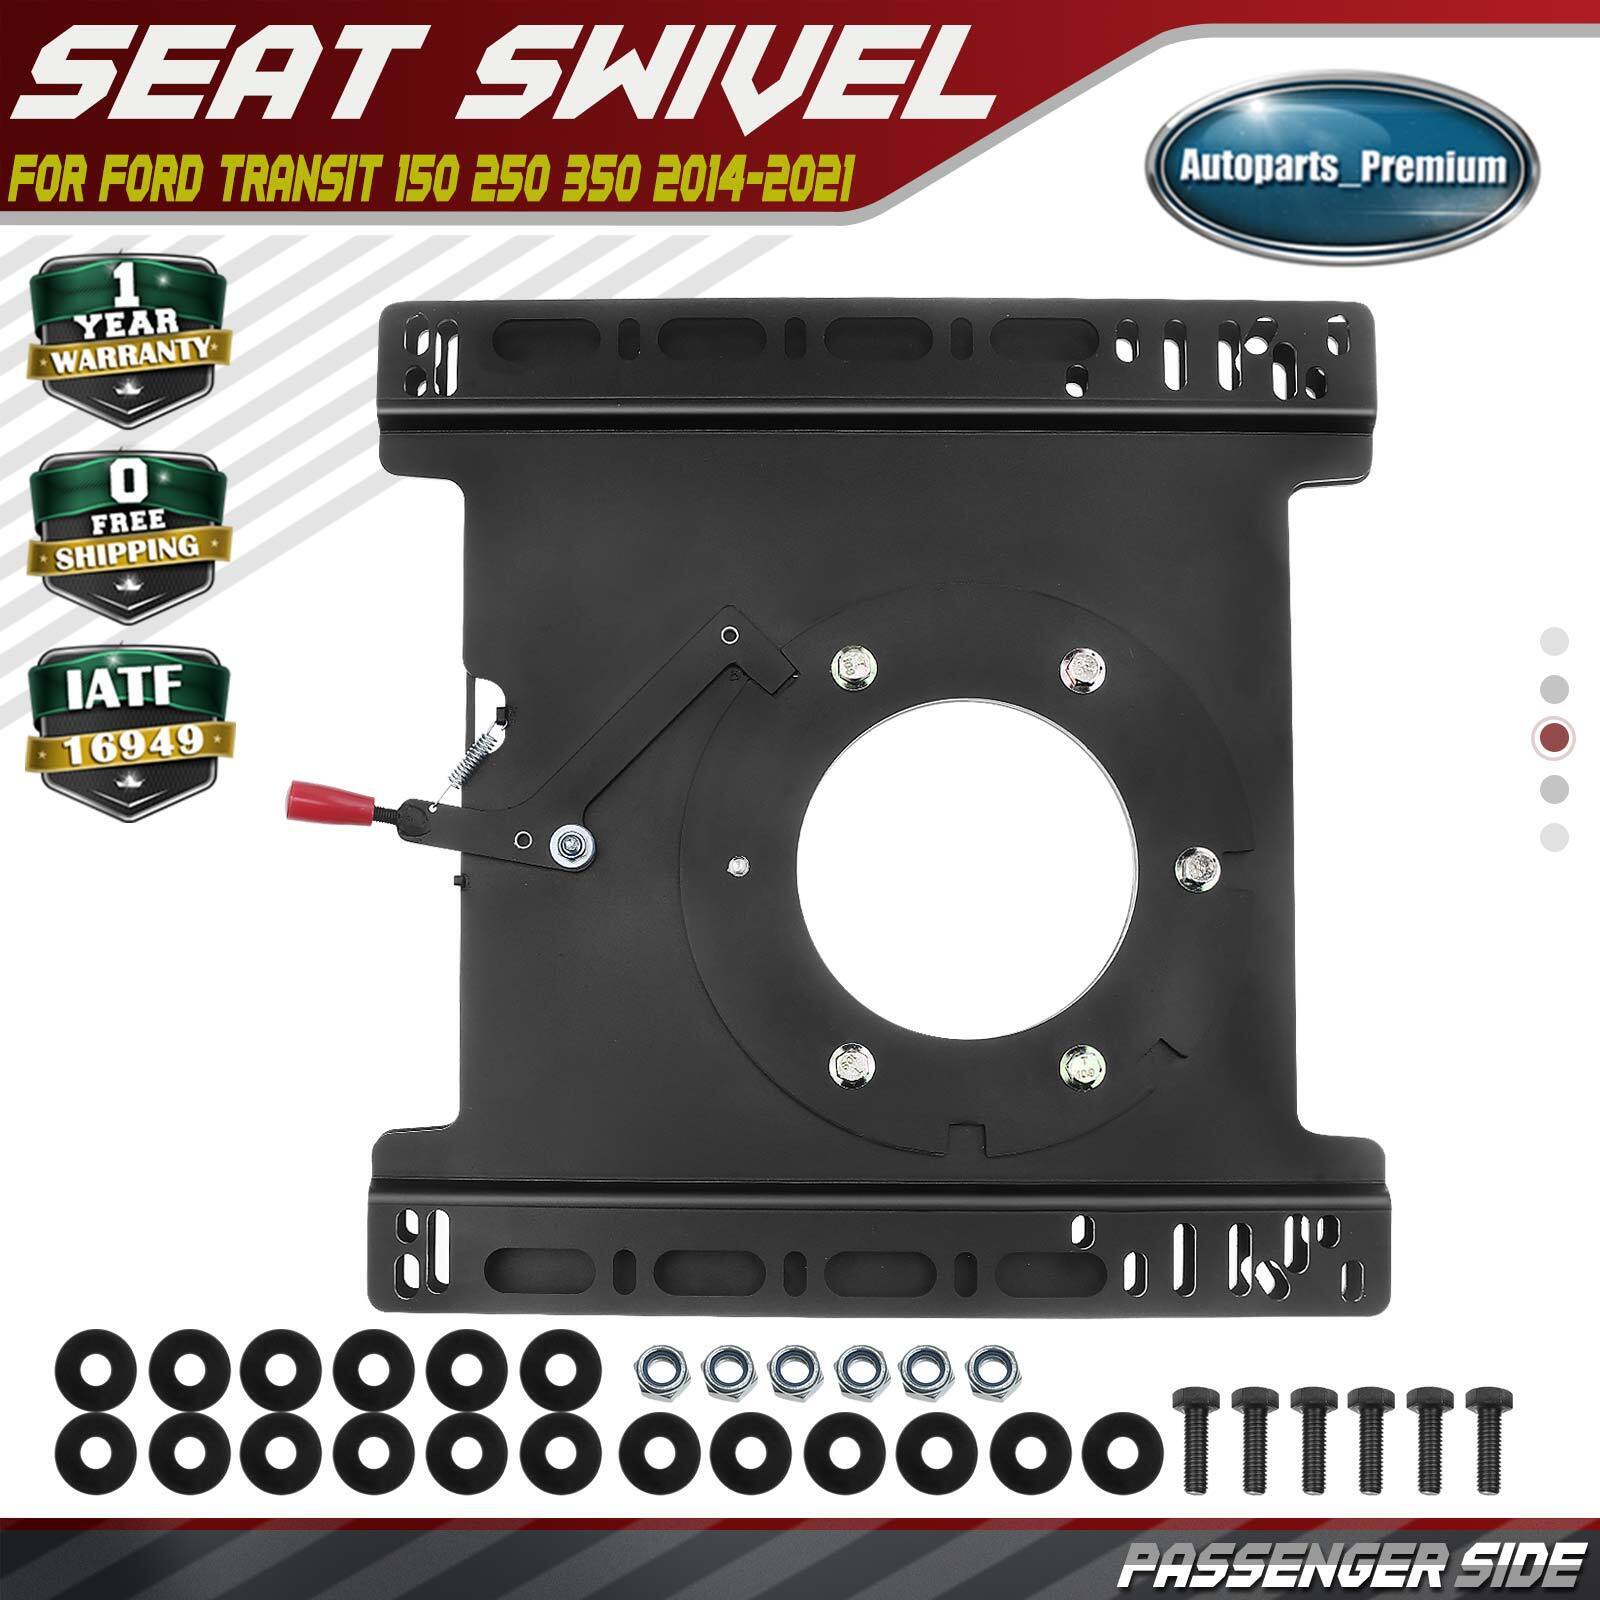 Right Seat Swivel for Ford Transit 150 250 350 2014 2015 2016 2017-2021 FTP004